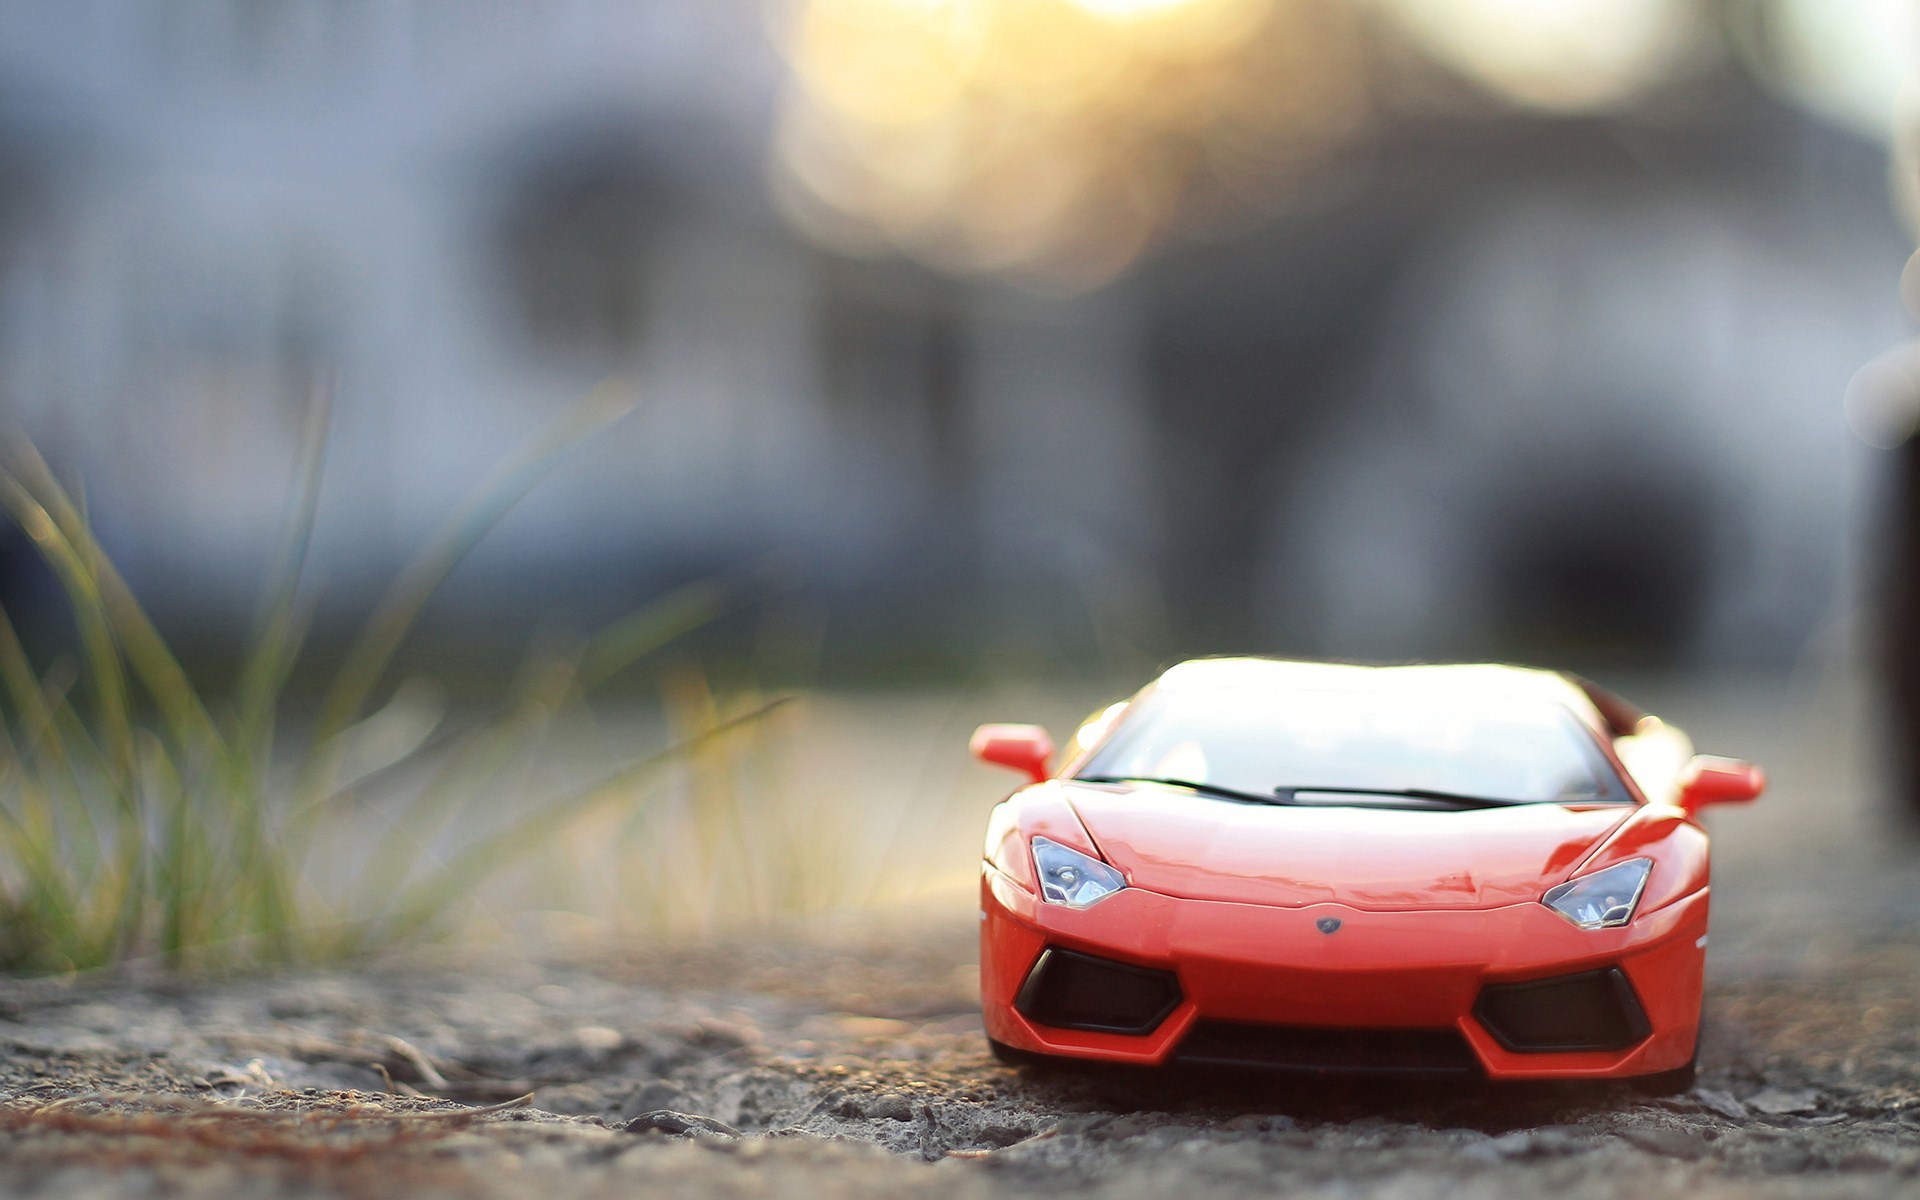 Awesome Toy Car Wallpaper